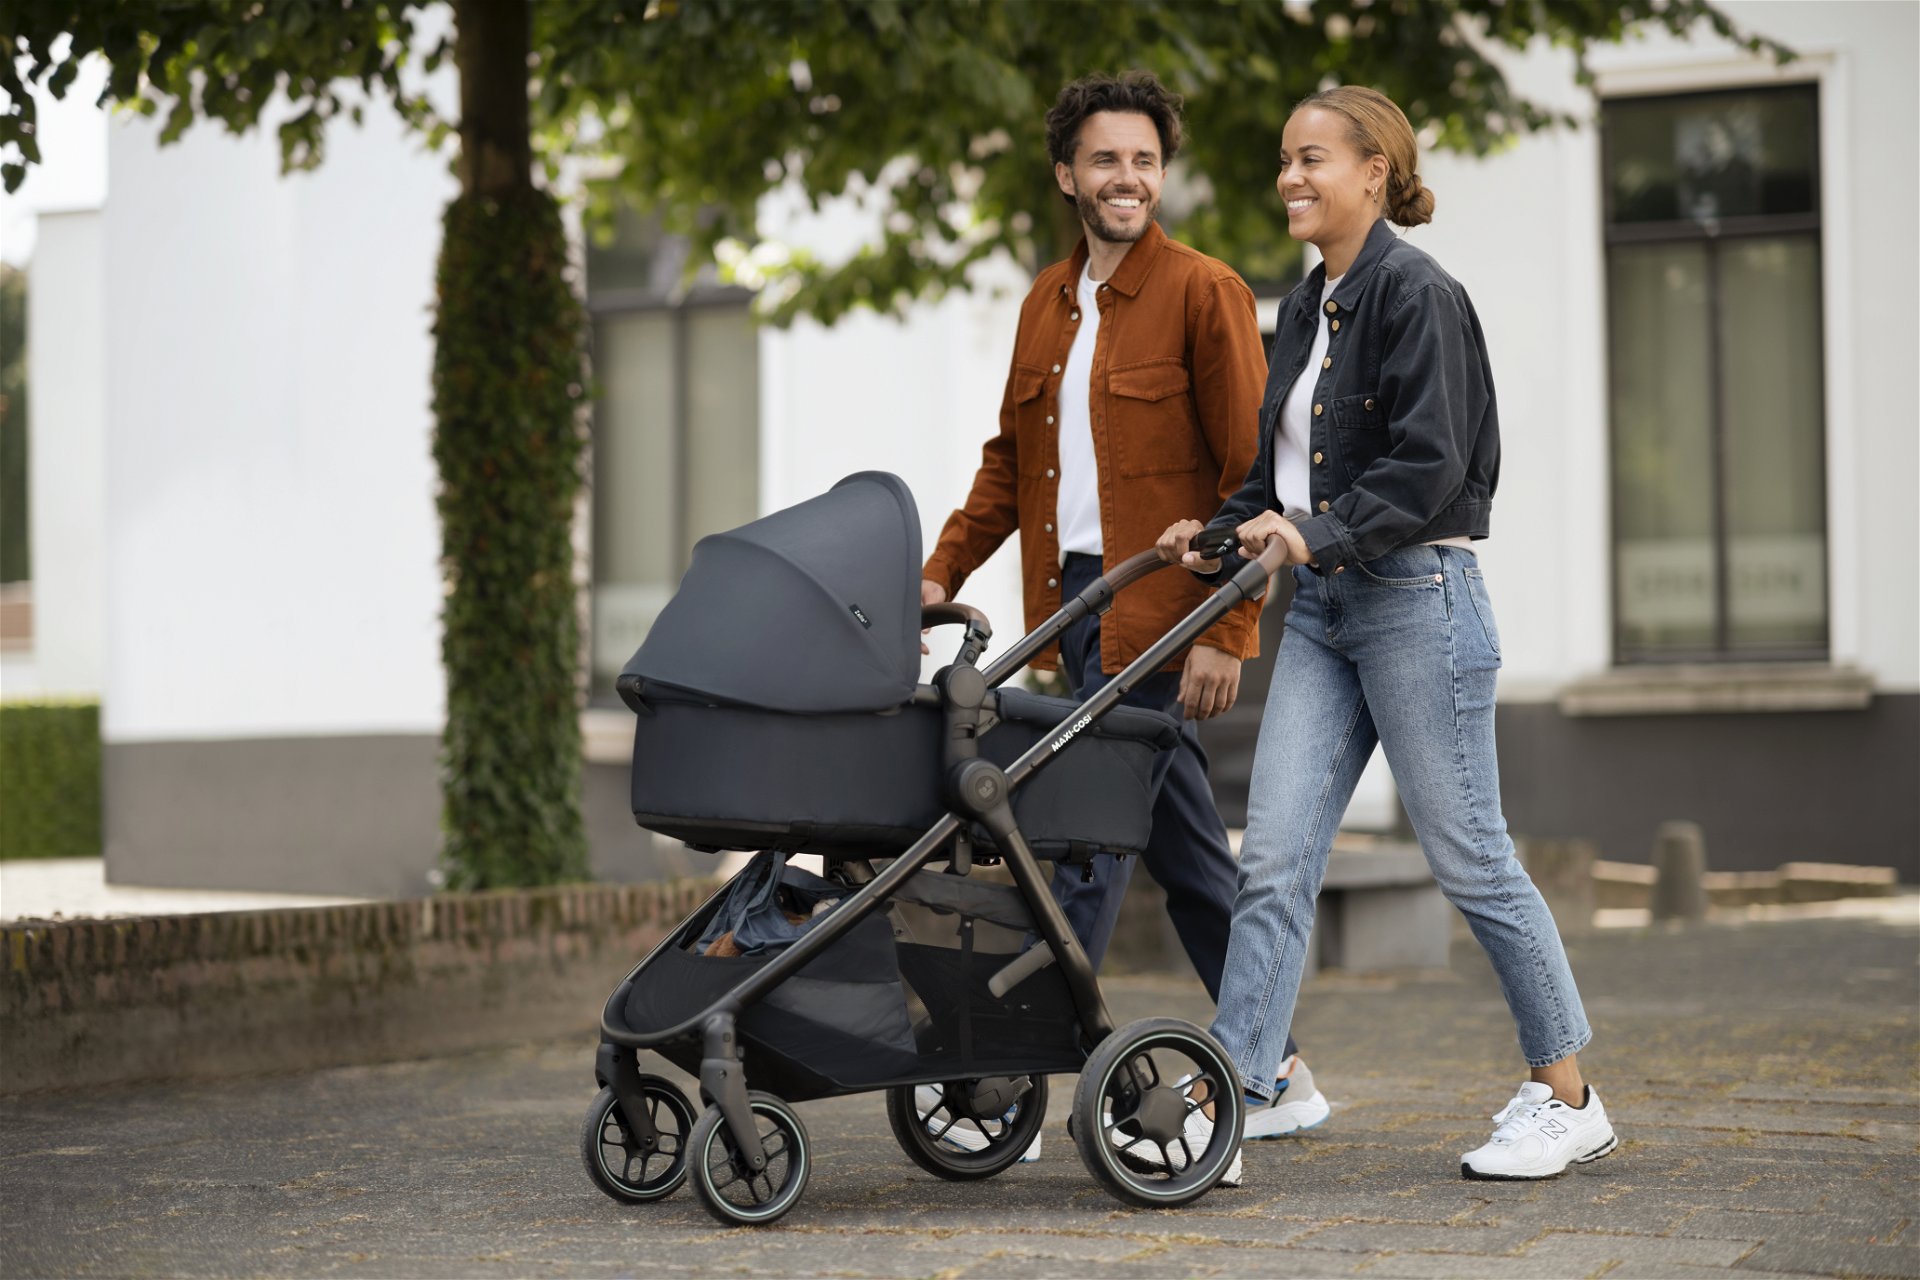 https://images.4mybaby.ch//media/4a/a3/fc/1683353684/MC1210_2021_maxicosi_Stroller_Zelia%C2%B3_Lifestyle_City_Familywithcarrycotmode_Landscape.jpg?width=1920